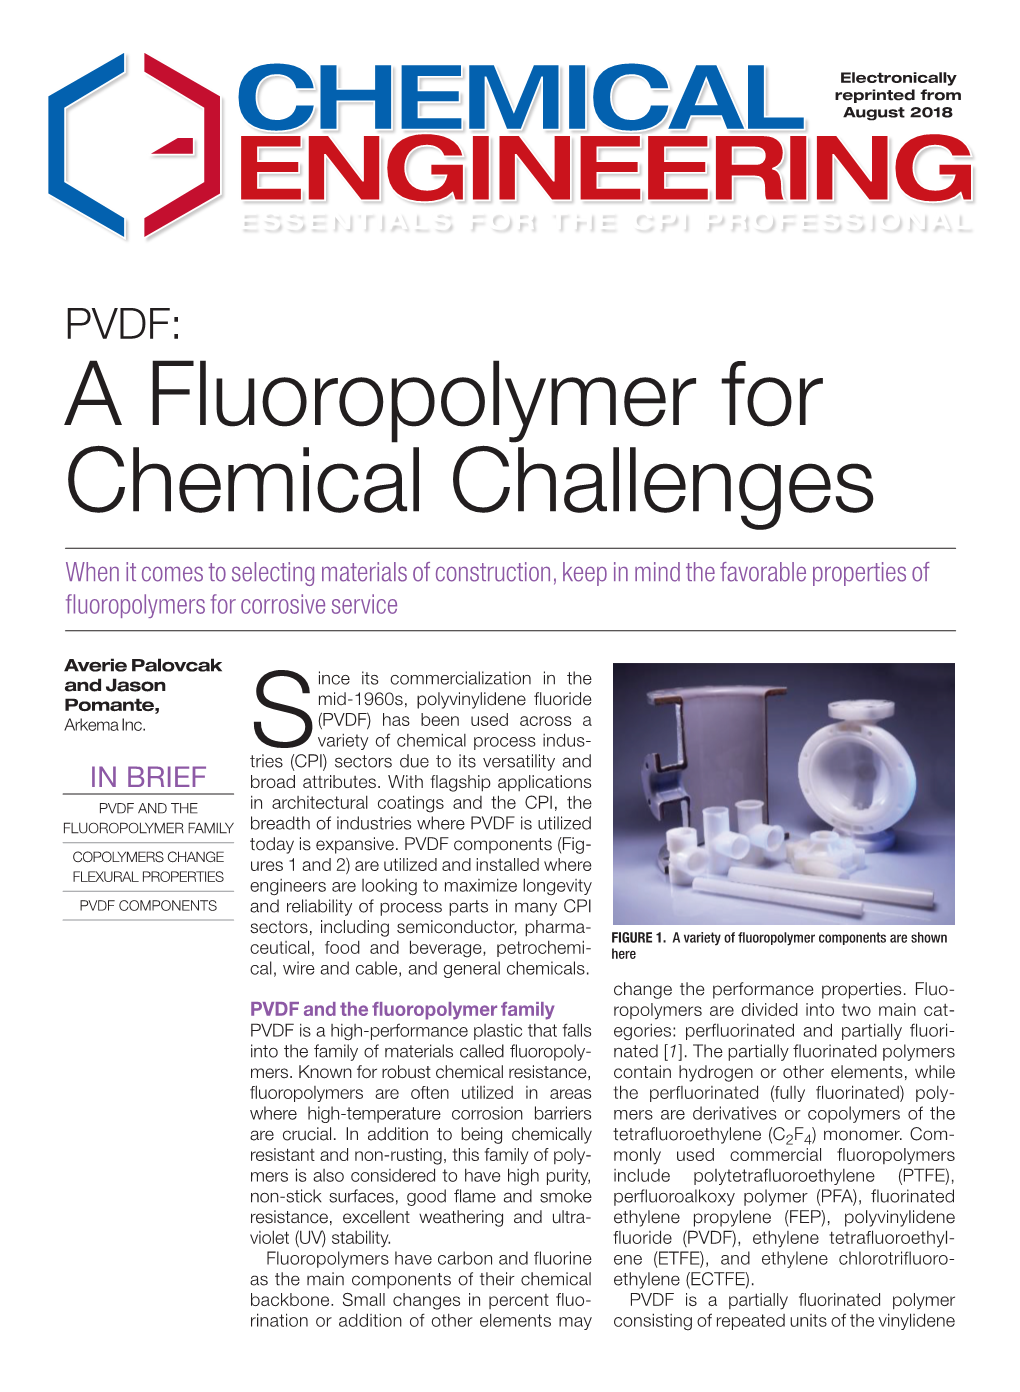 PVDF: a Fluoropolymer for Chemical Challenges